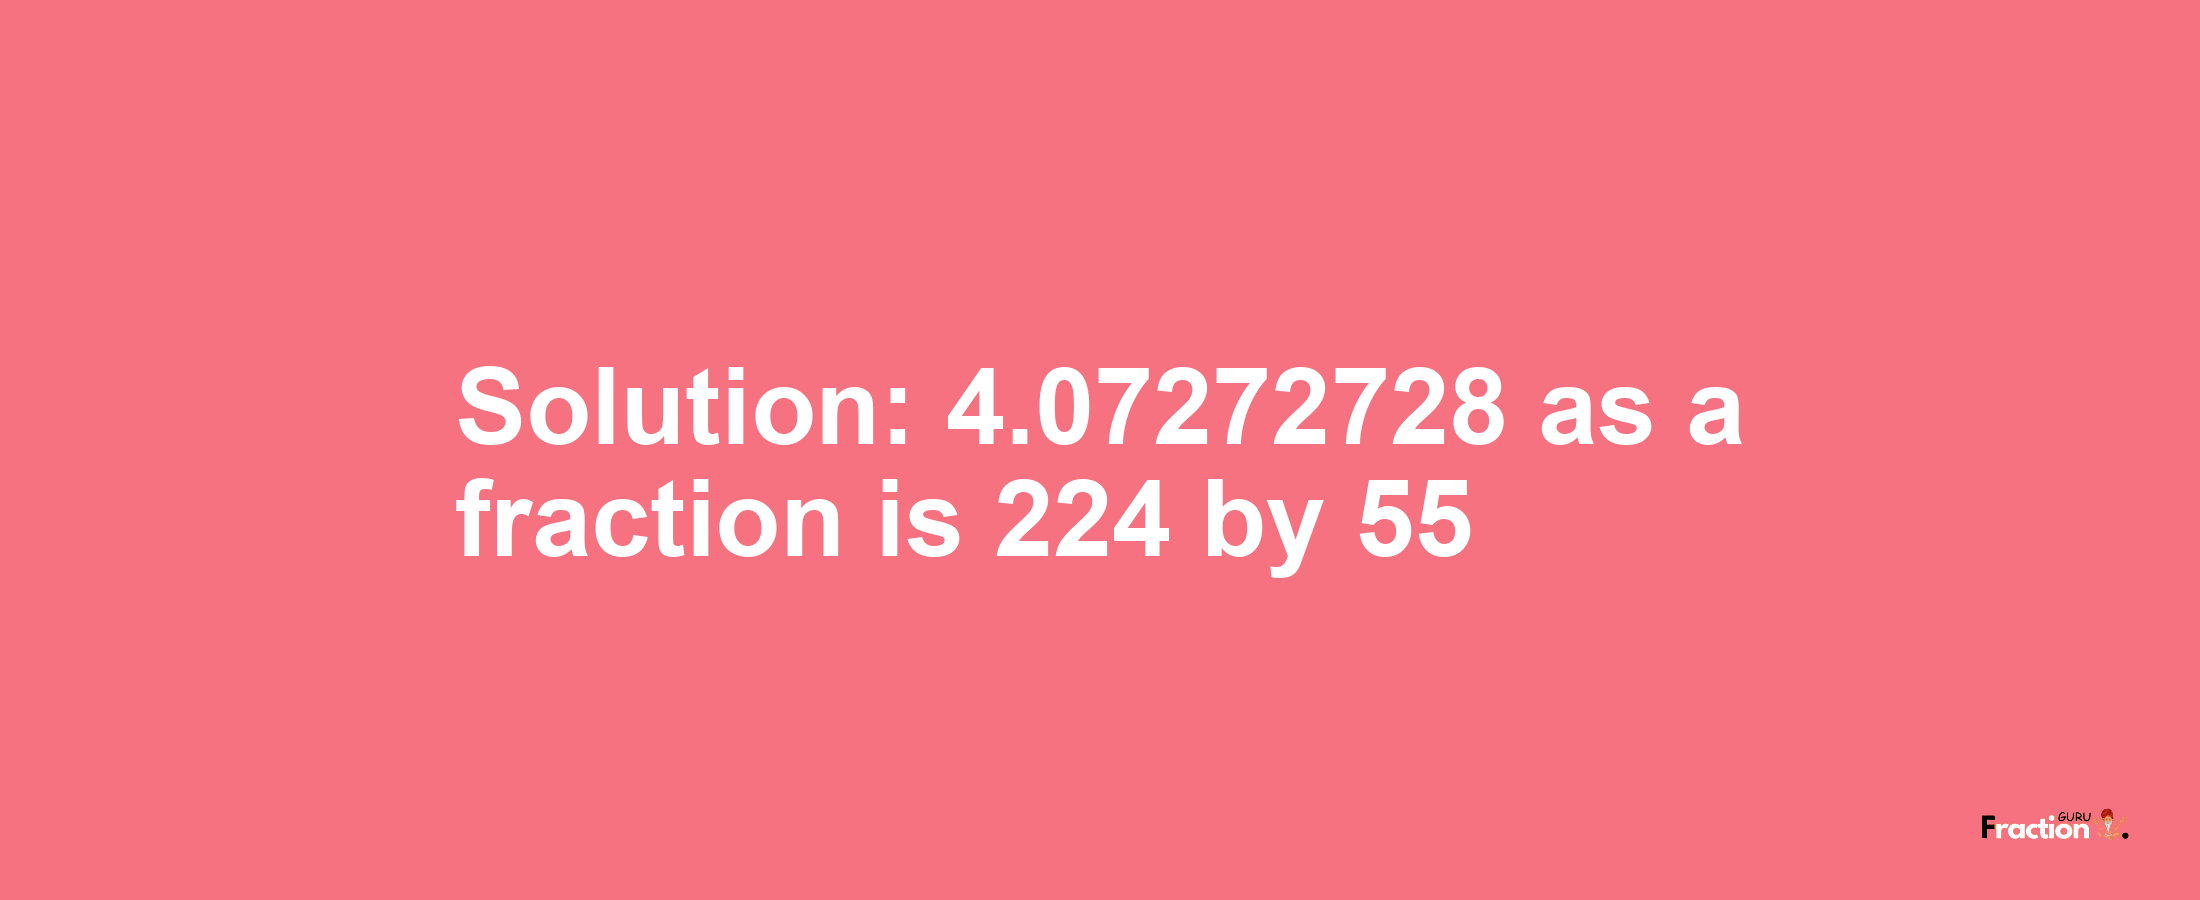 Solution:4.07272728 as a fraction is 224/55